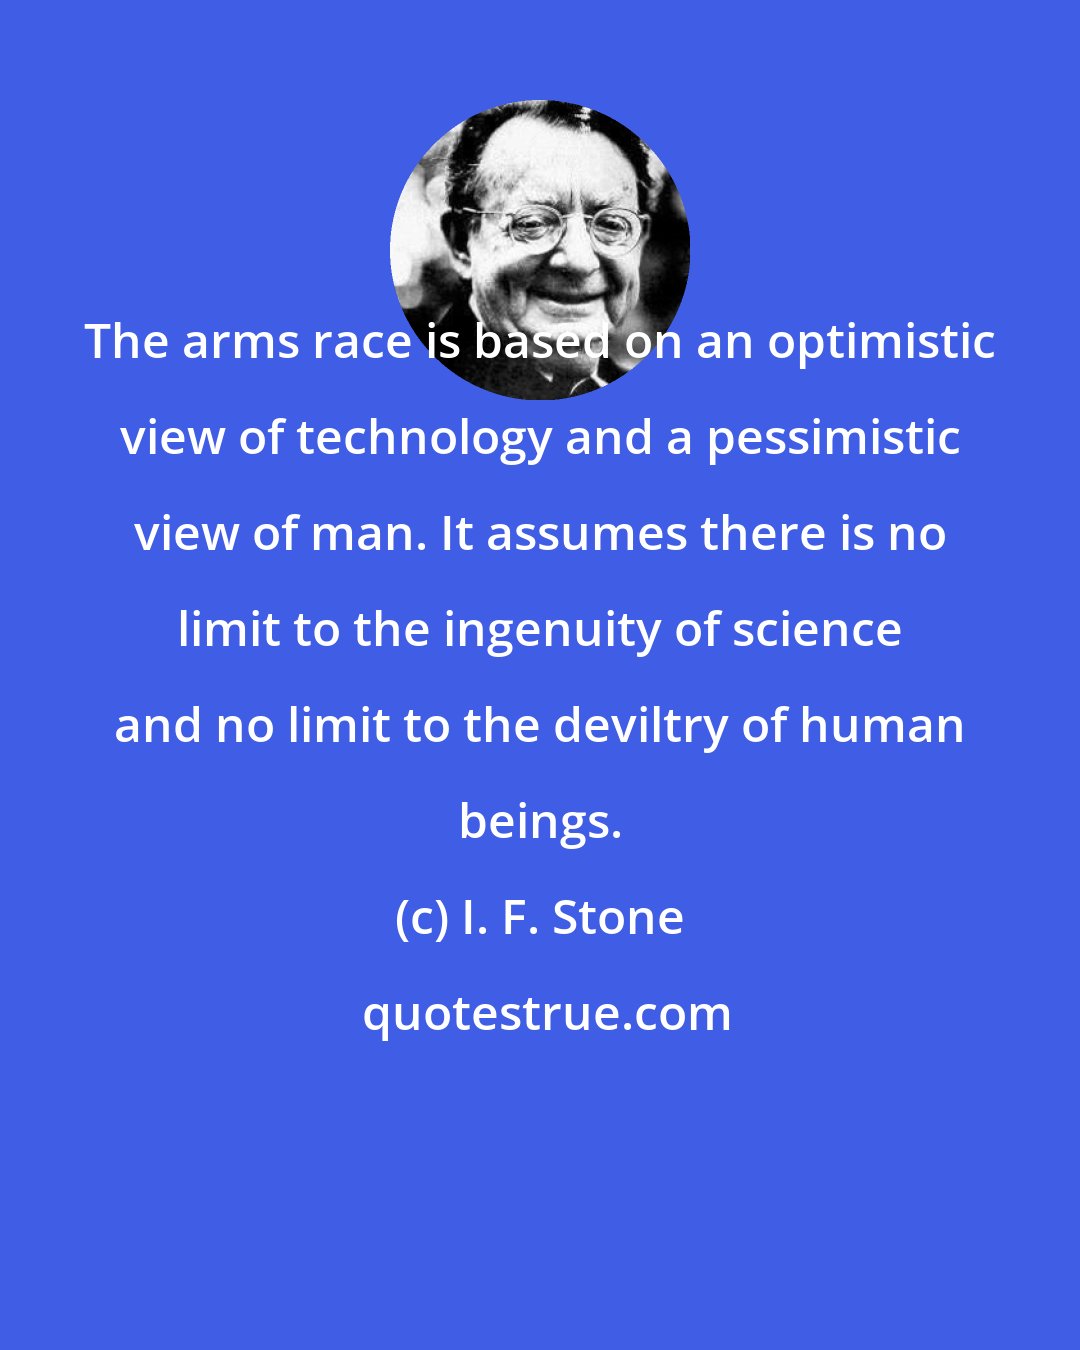 I. F. Stone: The arms race is based on an optimistic view of technology and a pessimistic view of man. It assumes there is no limit to the ingenuity of science and no limit to the deviltry of human beings.